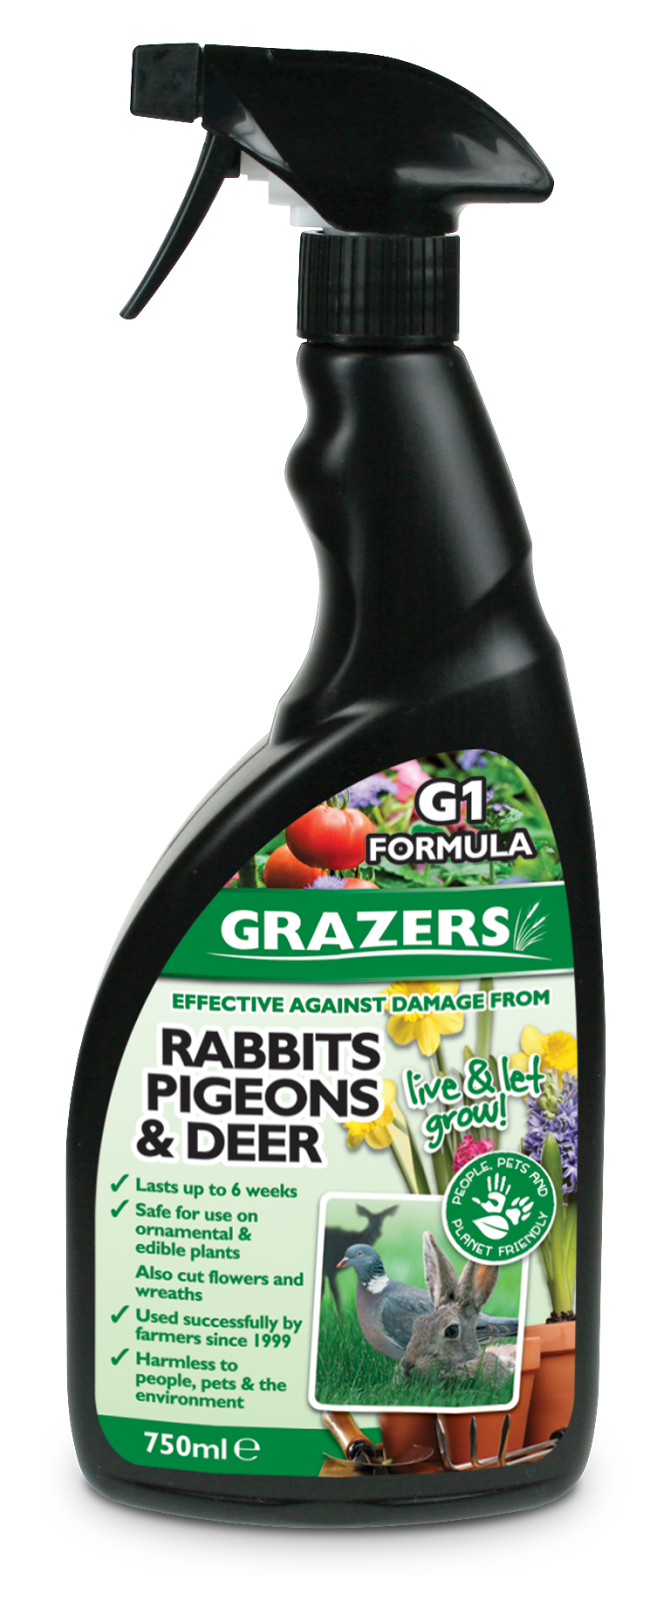 Grazers G1 effective against damage from RABBITS,PIGEON & DEER